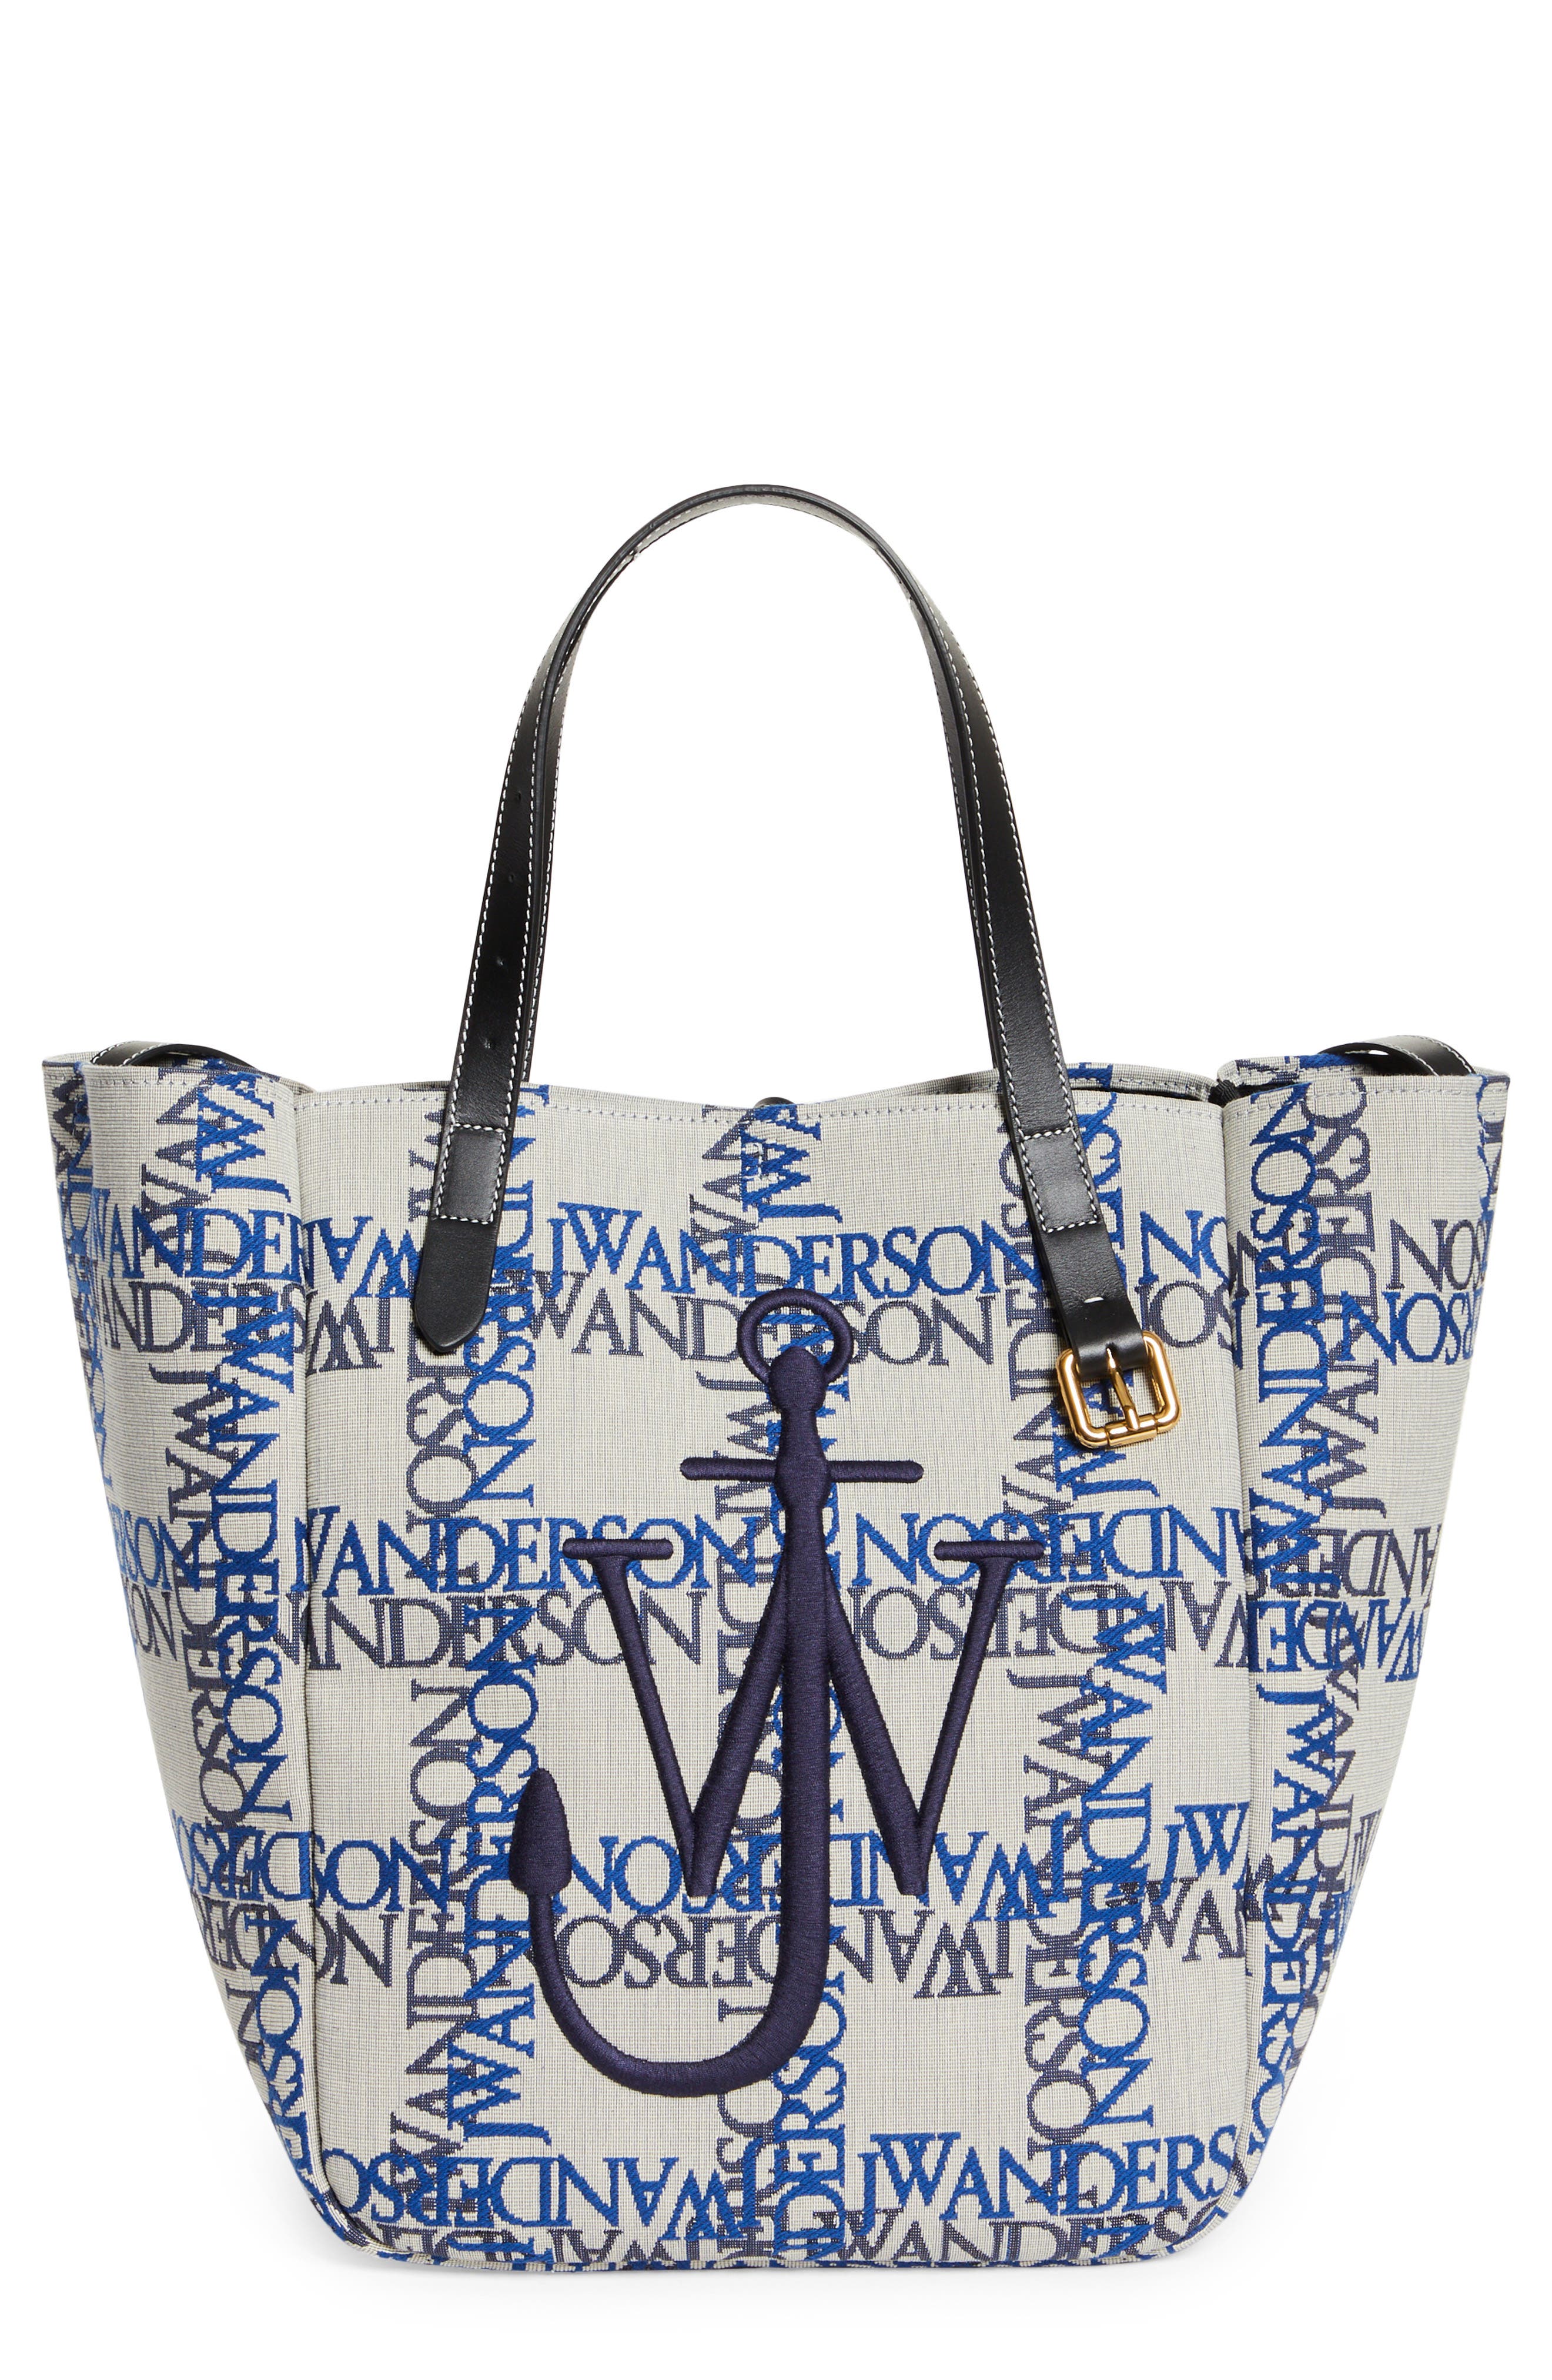 JW Anderson Cabas Jacquard Tote in Black/Off White/Blue